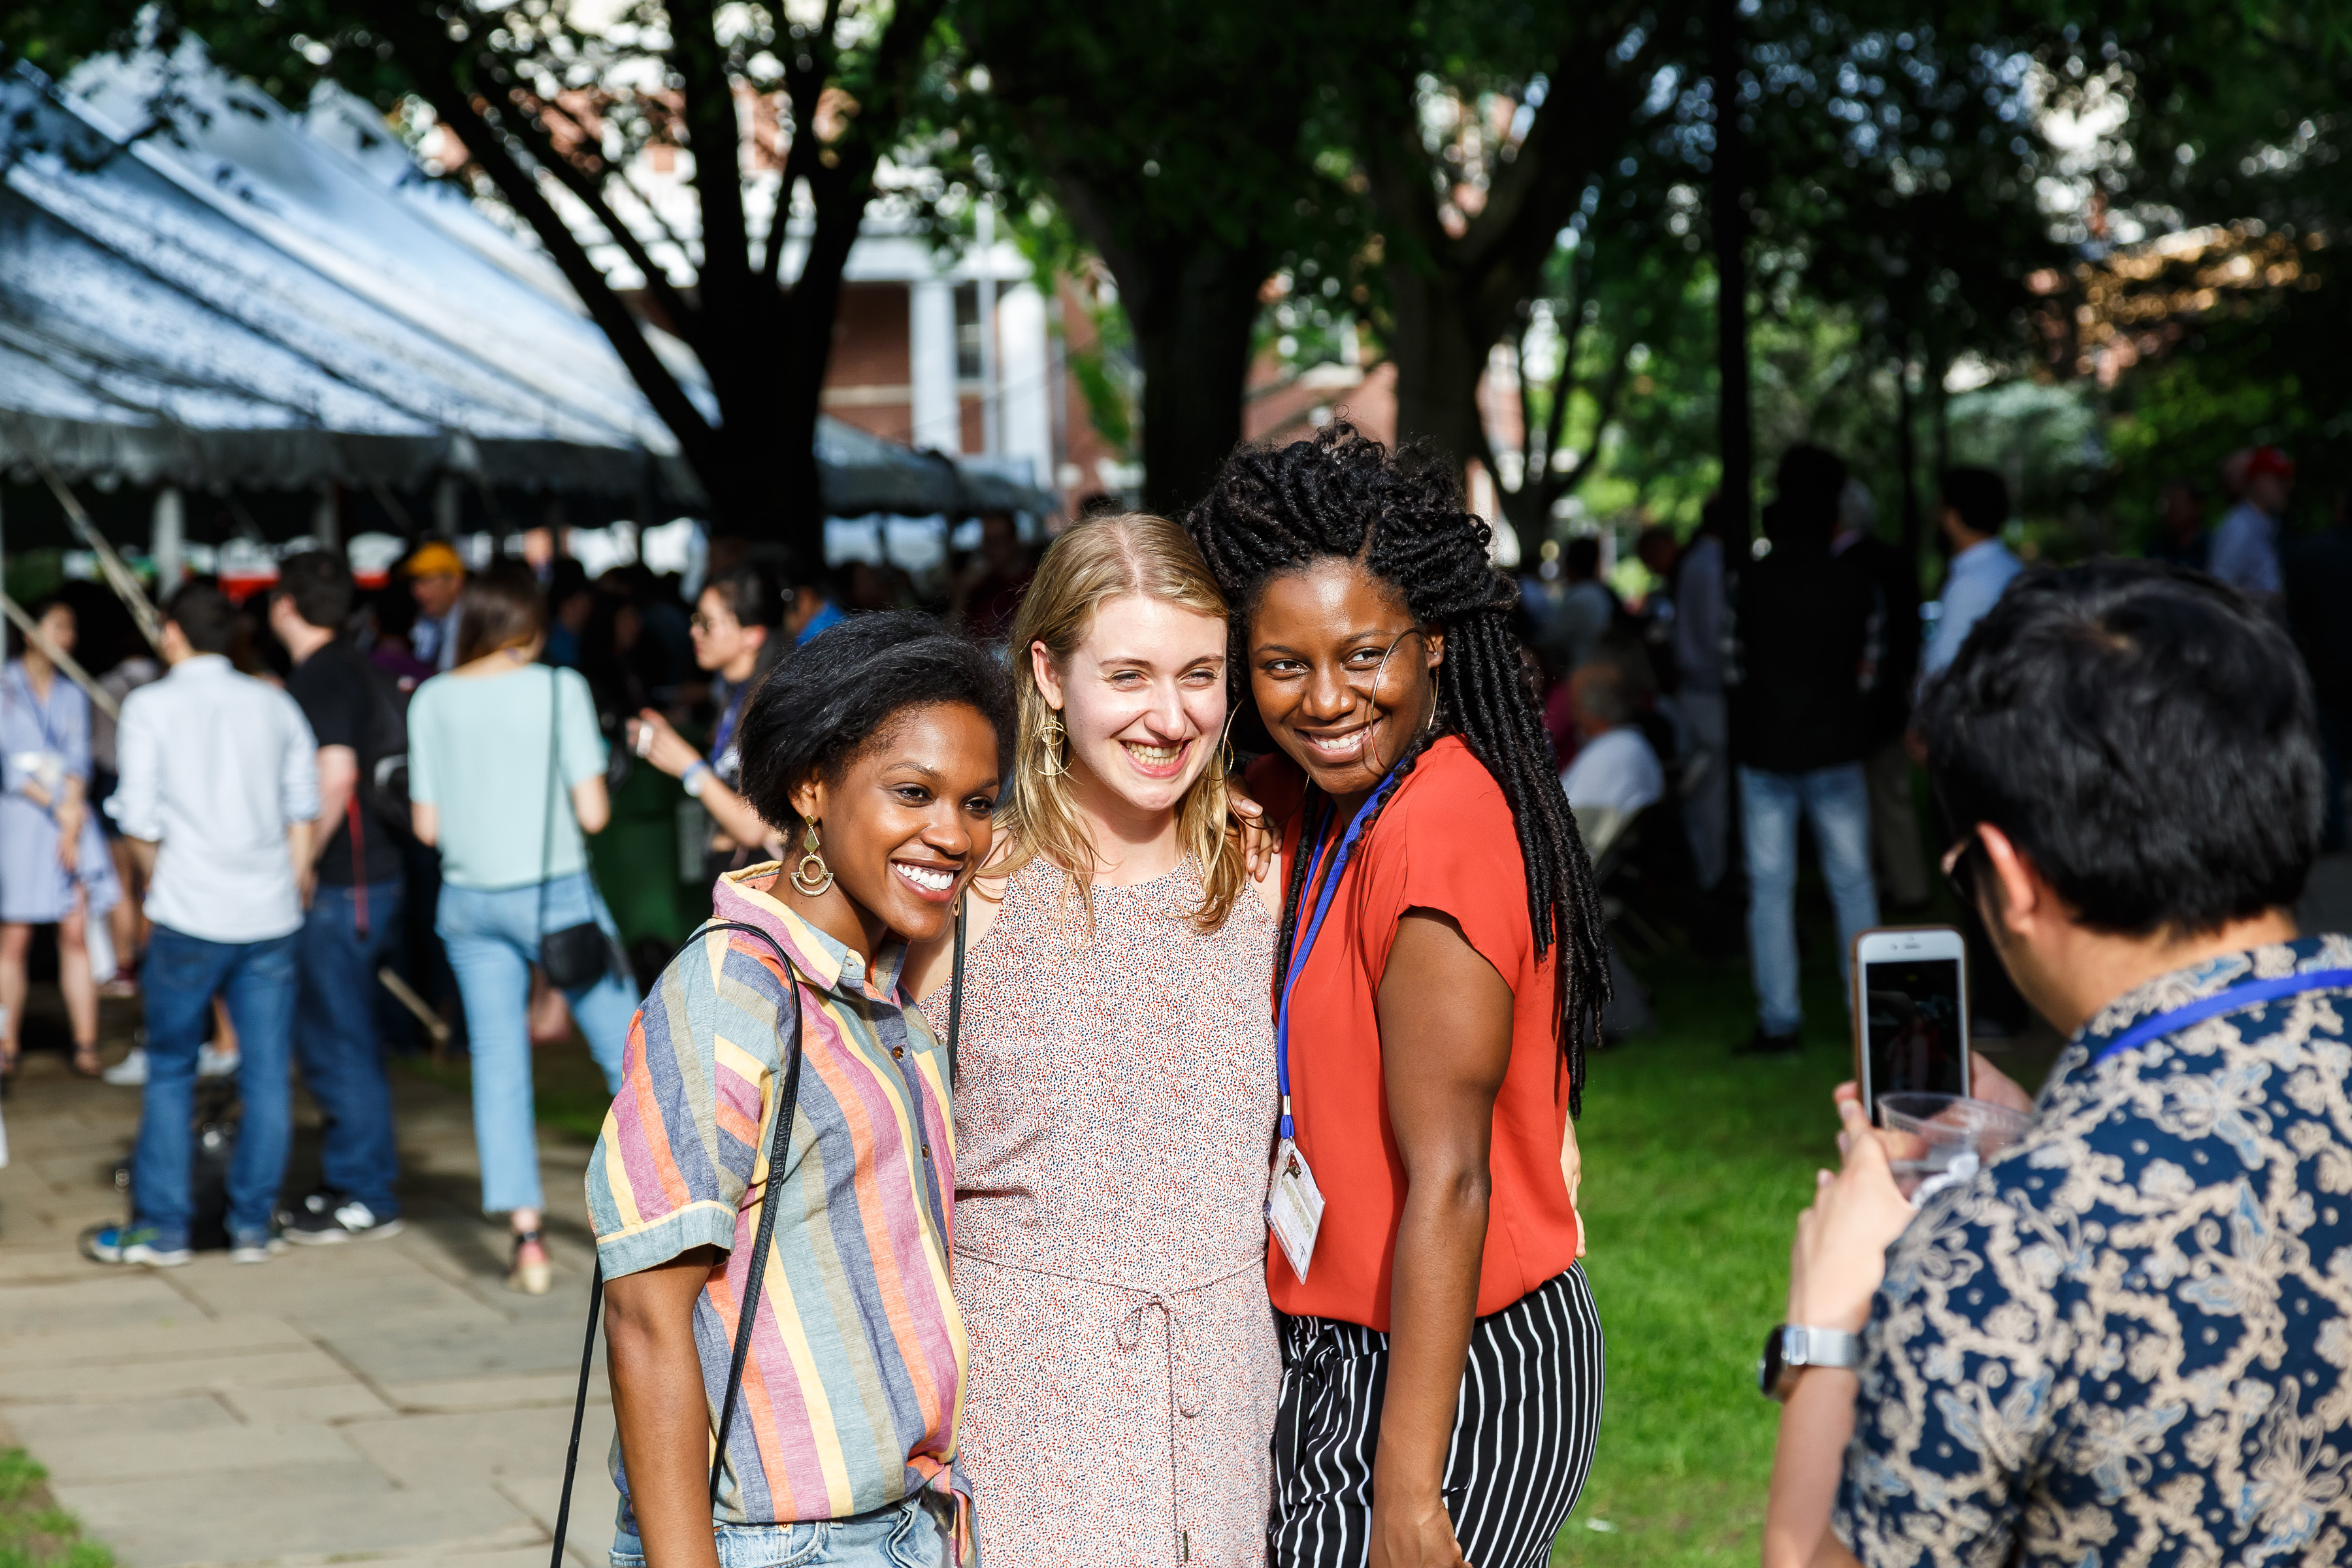 A group gathers for a photo during Week 2 of the 2018 Yale College Class Reunions.